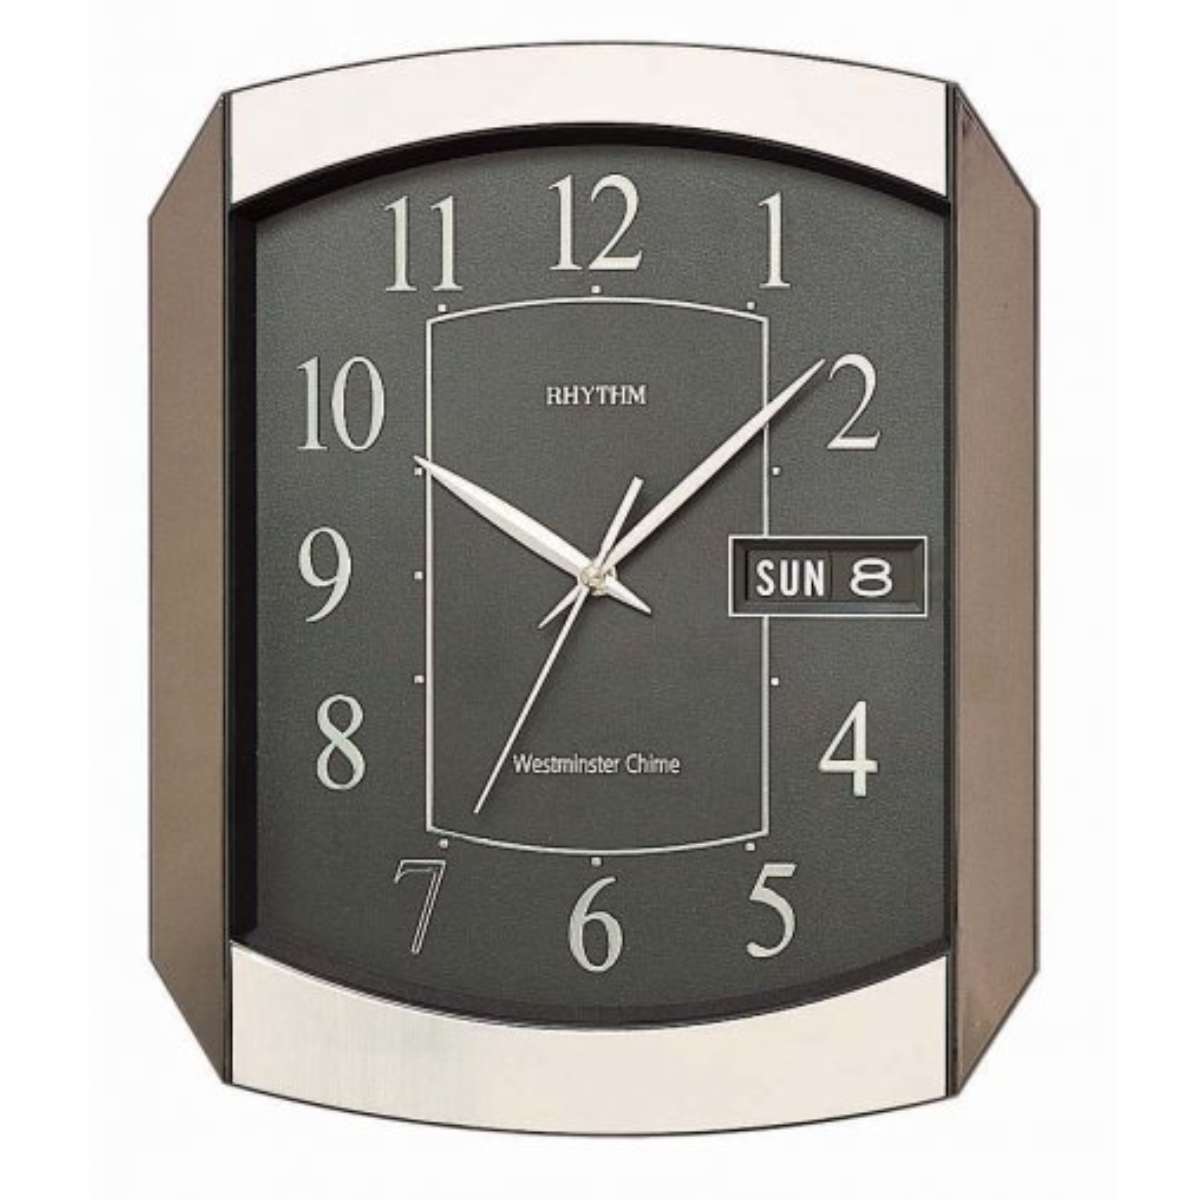 Rhythm CFH102NR02 Westminster Chime Black Dial Wall Clock (Singapore Only)